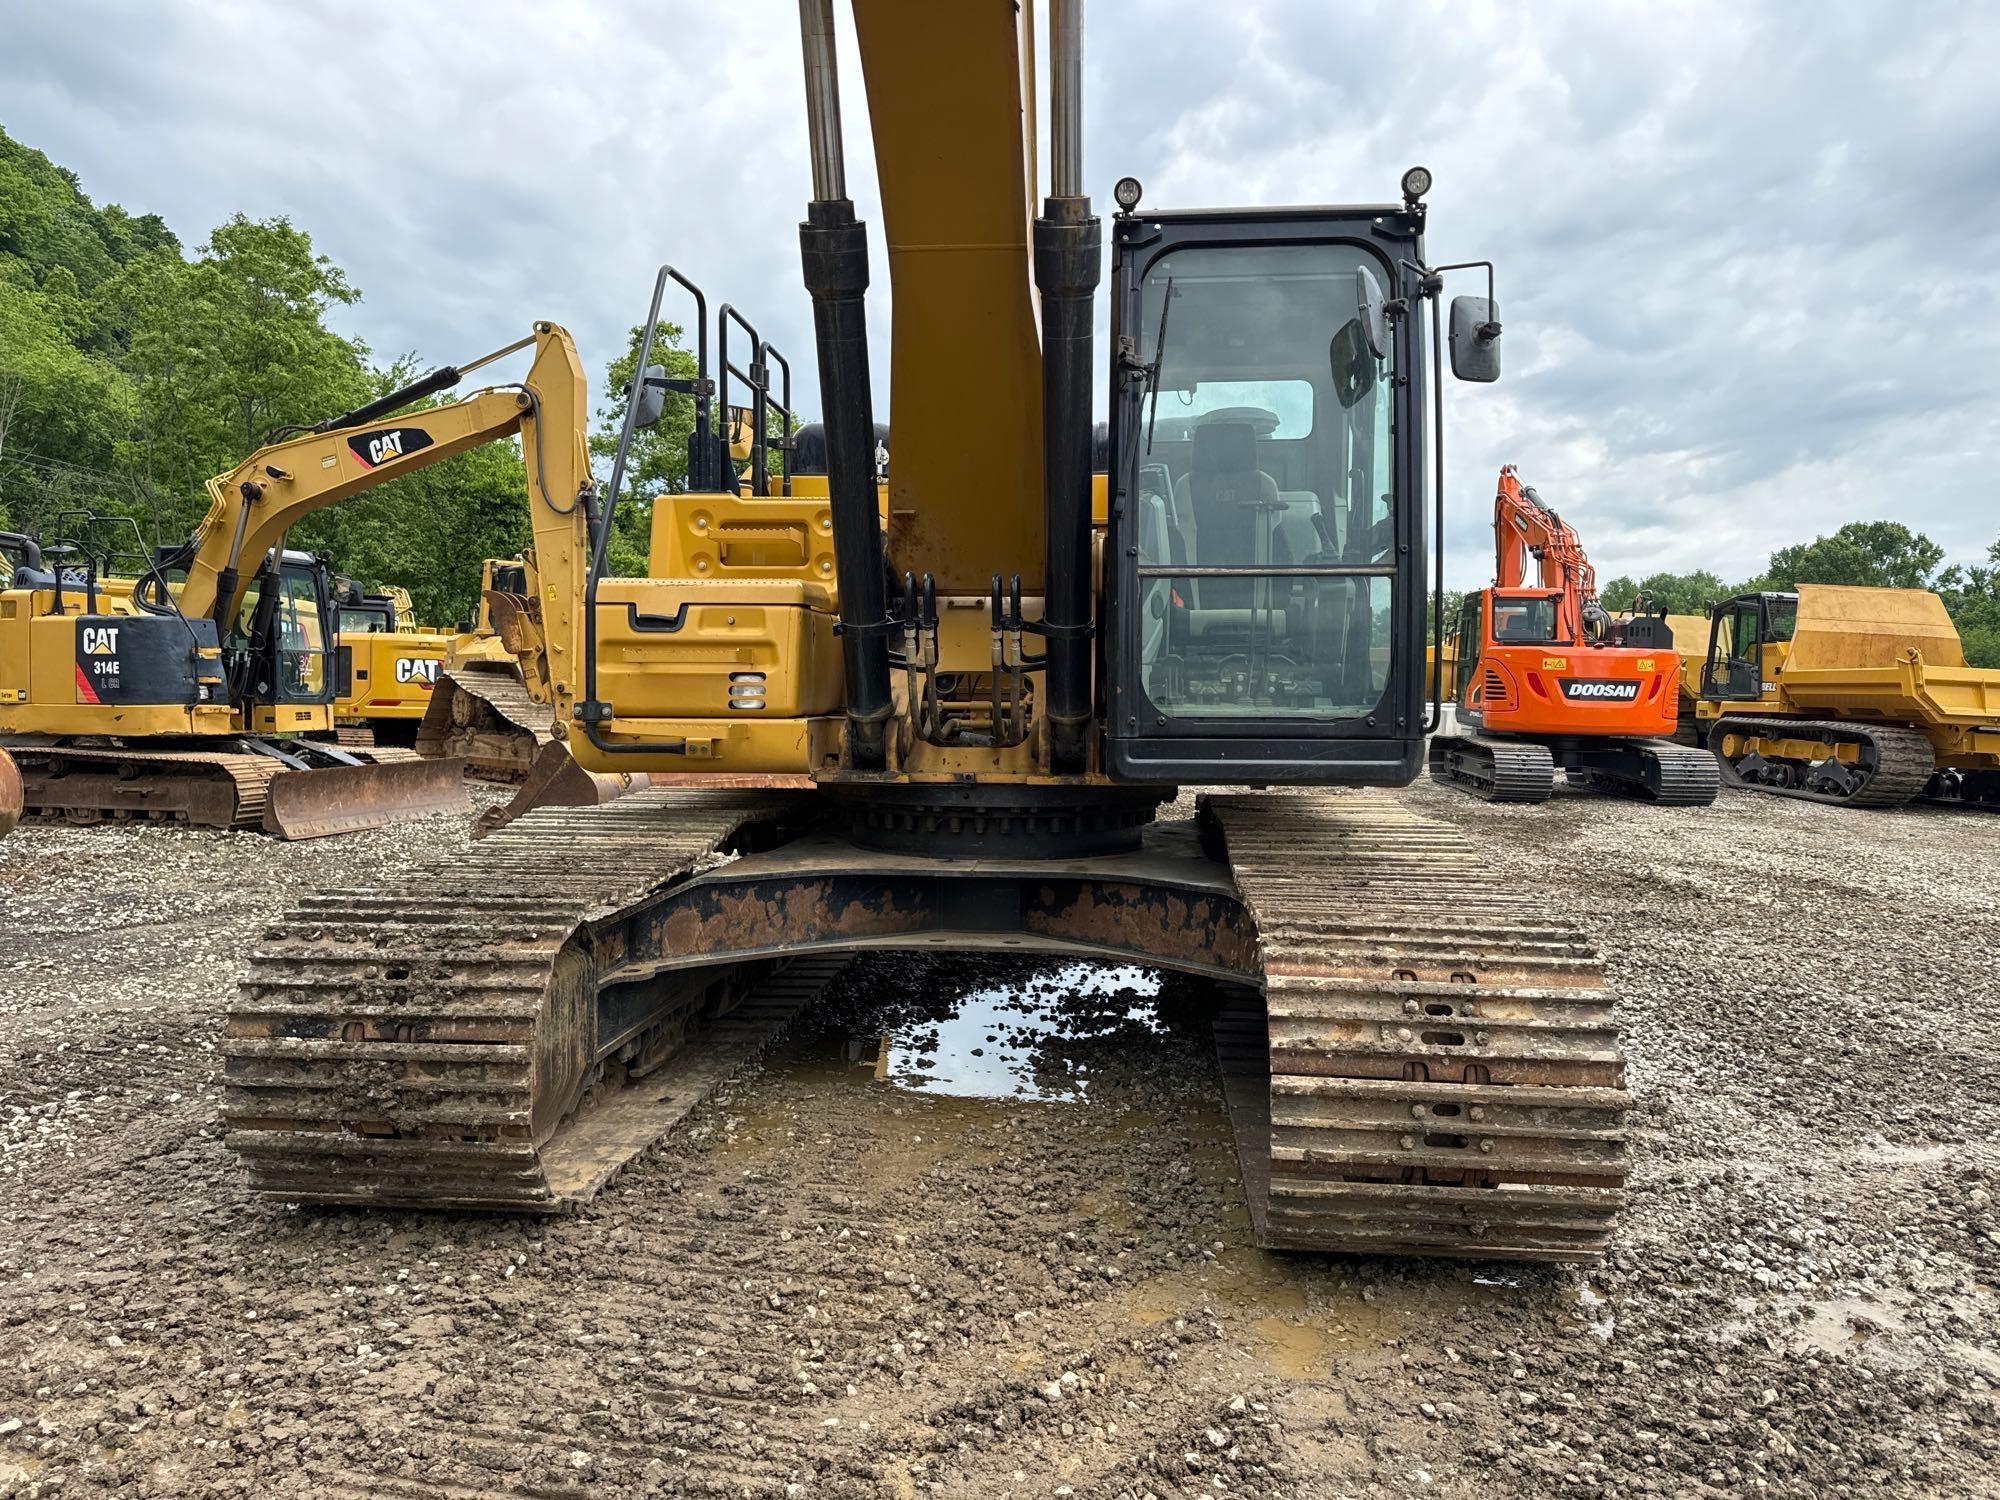 2017 CAT 330FL HYDRAULIC EXCAVATOR SN:MBX10466 powered by Cat C7.1 diesel engine, equipped with Cab,